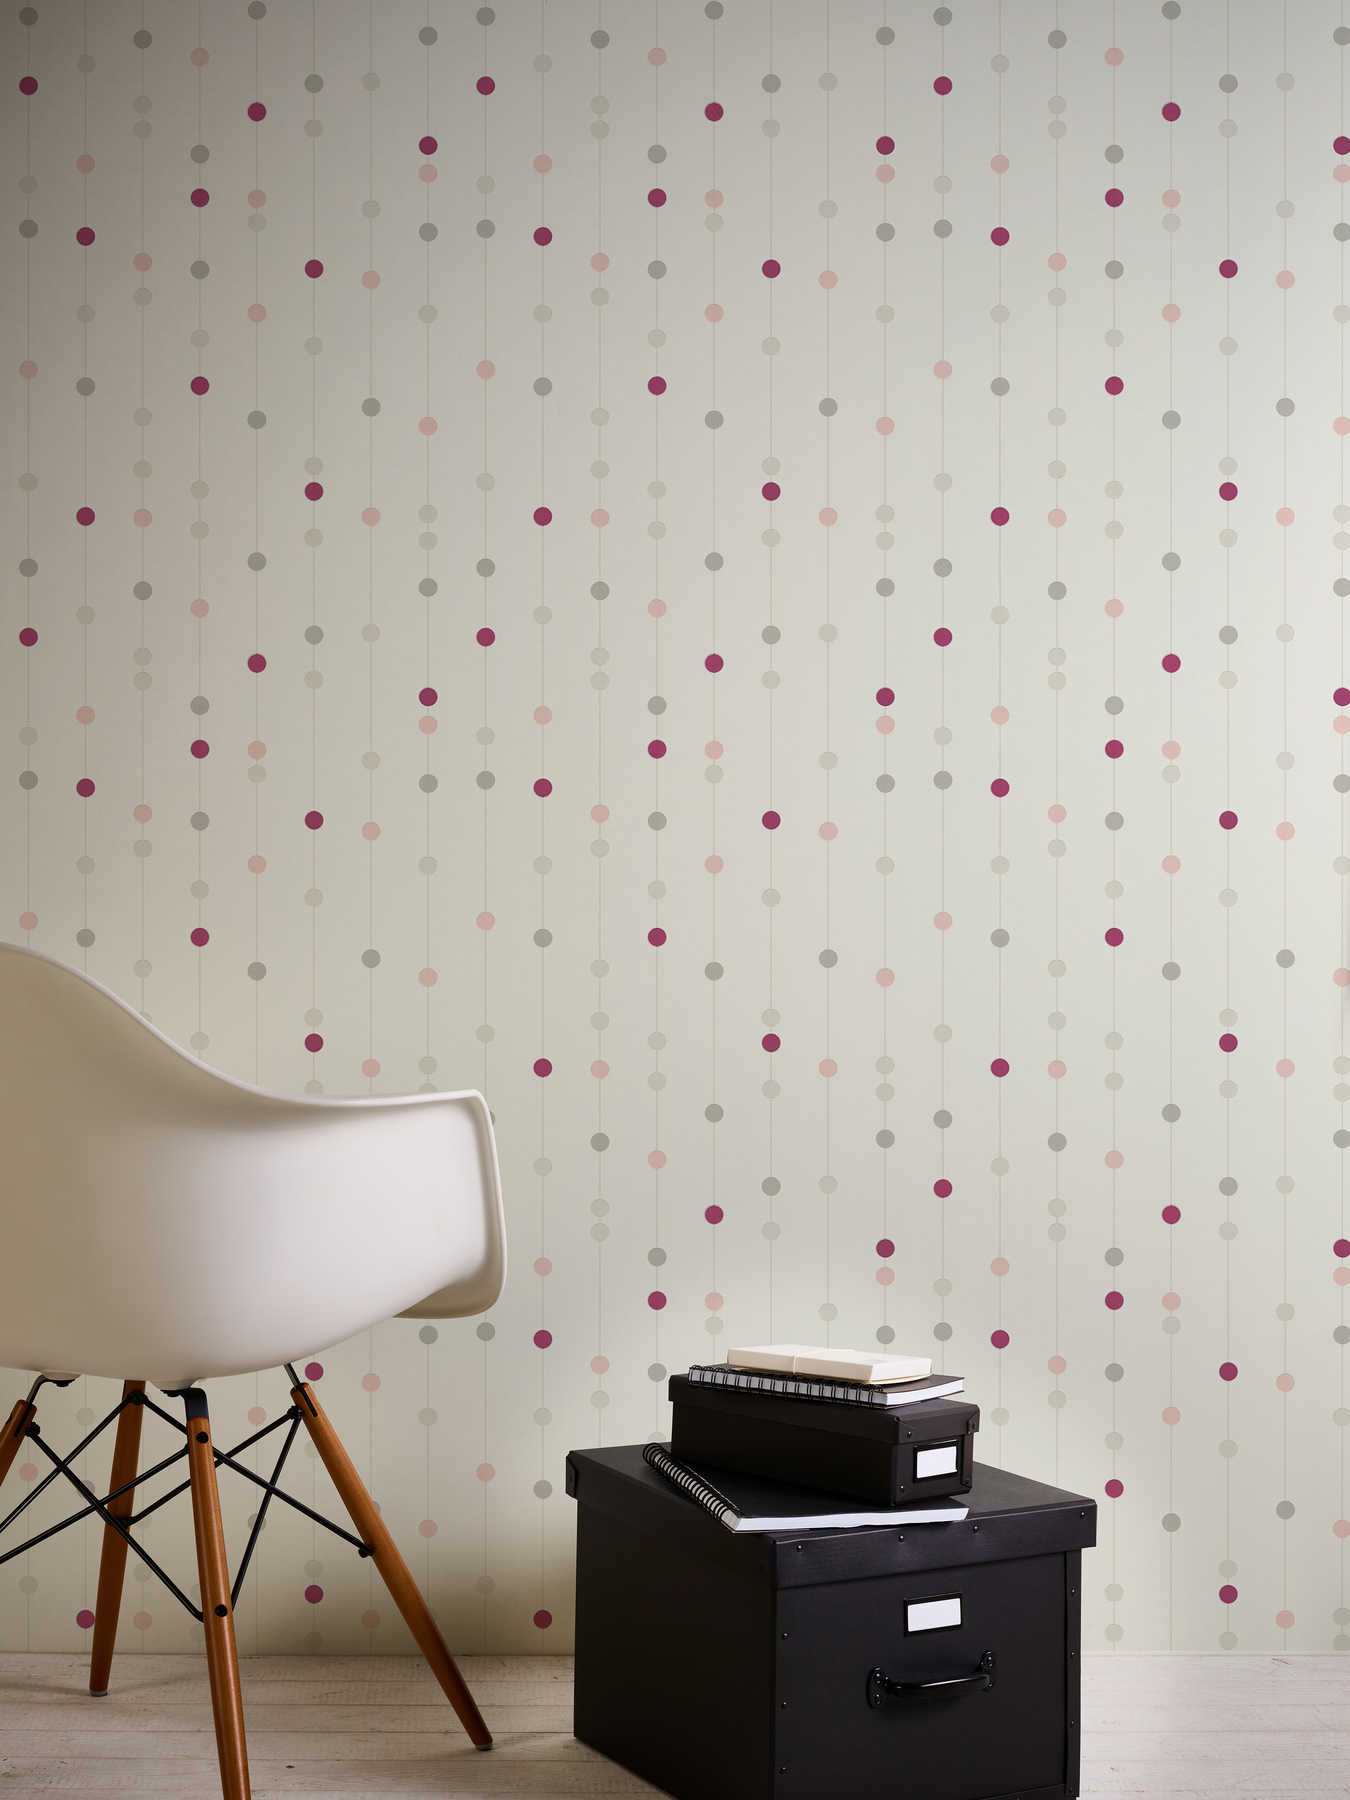             Purple dotted non-woven wallpaper with metallic effect - red, beige, white
        